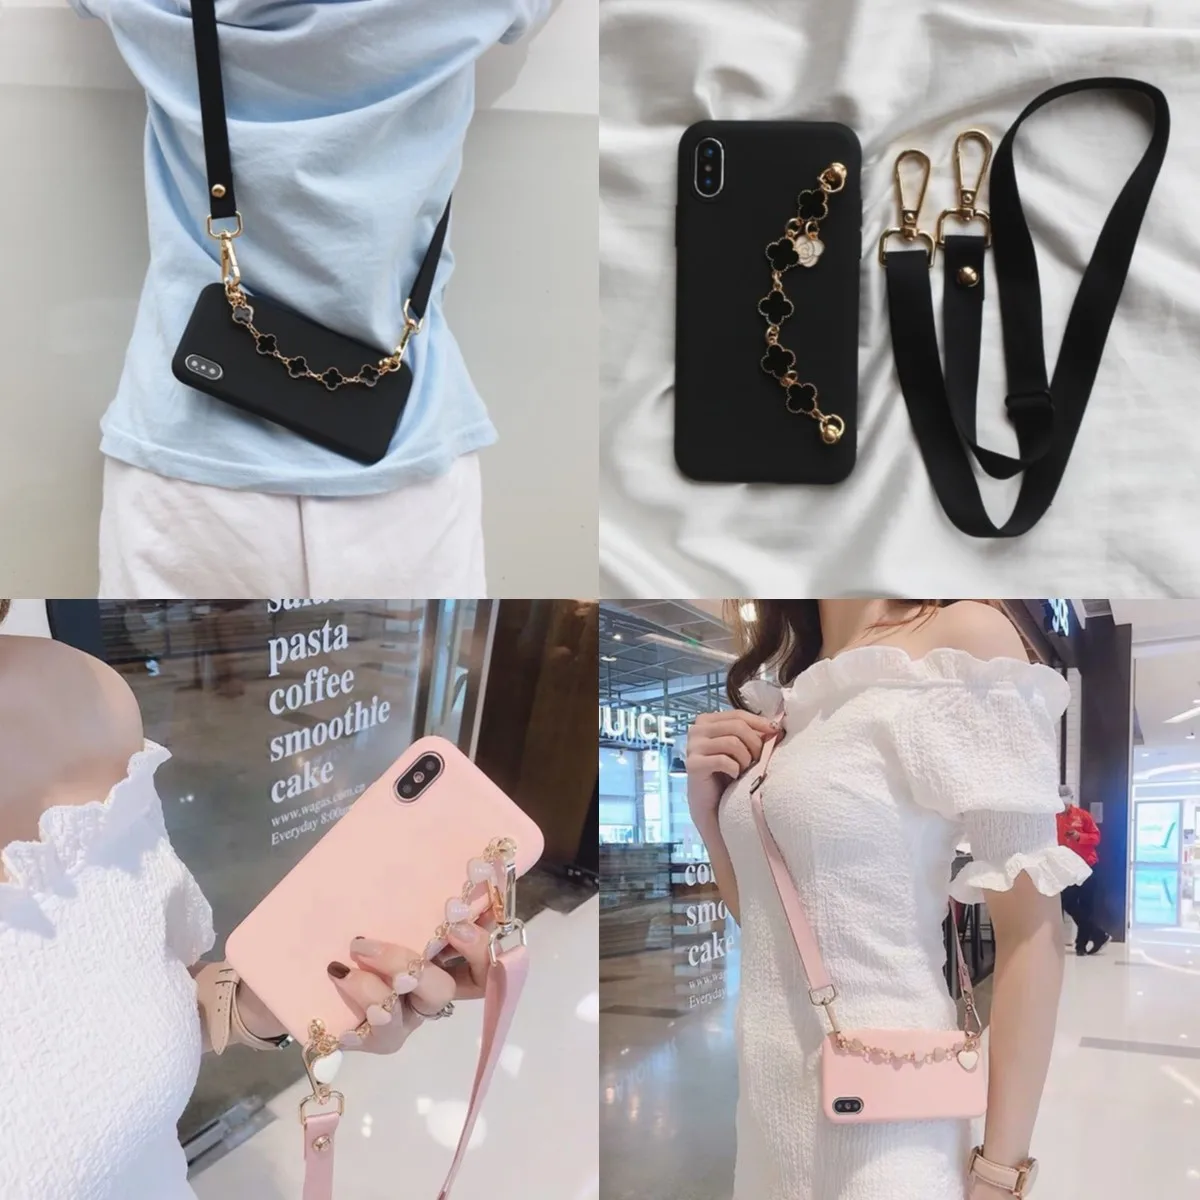 For Samsung Galaxy S7 Edge S8 S9 S10 S20 S21 22 Ultra FE Note 8 9 10 lite 20 Plus Soft TPU Flowers love Bracelet Strap Rope Case